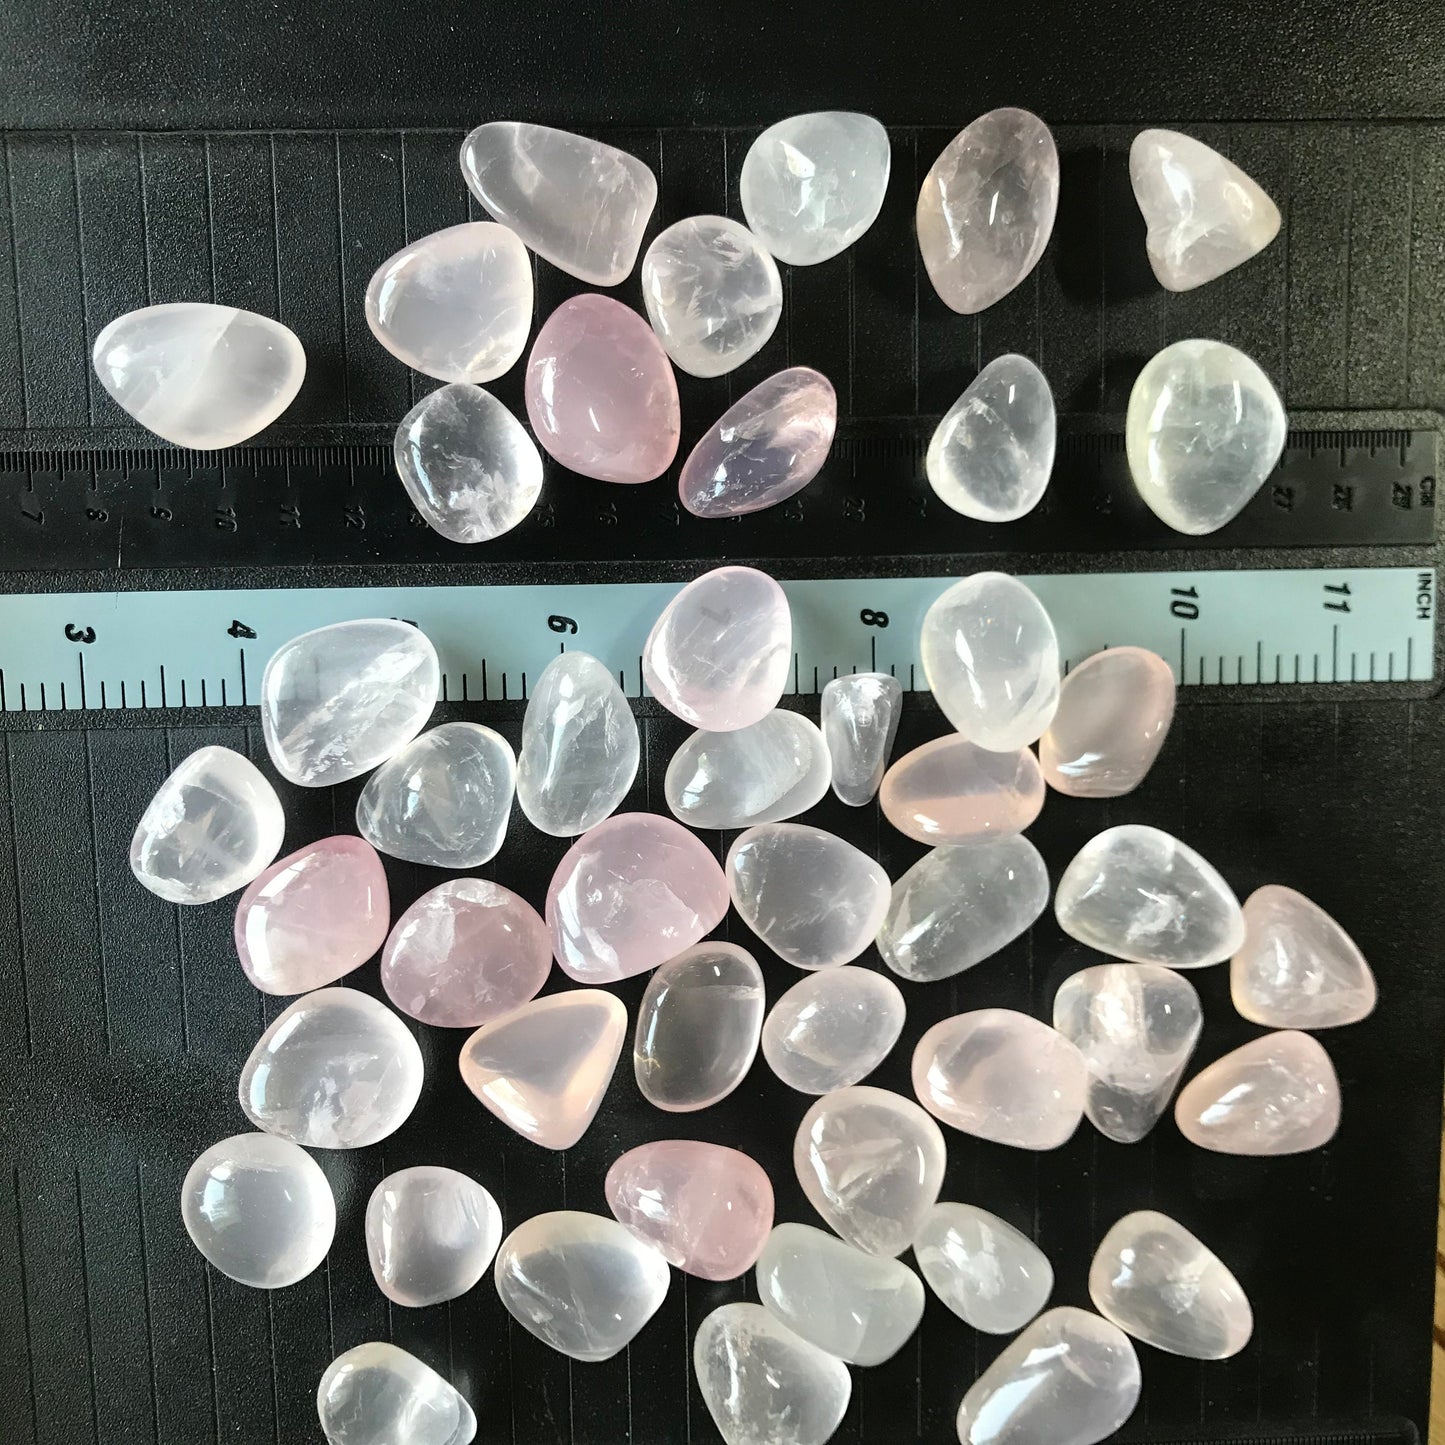 Rose Quartz, Polished Tumbled Crystal (Approx. 3/4" - 1") Polished Stone for the Heart Chakra, for Wire Wrapping or Crystal Grid Supply BIN-1378